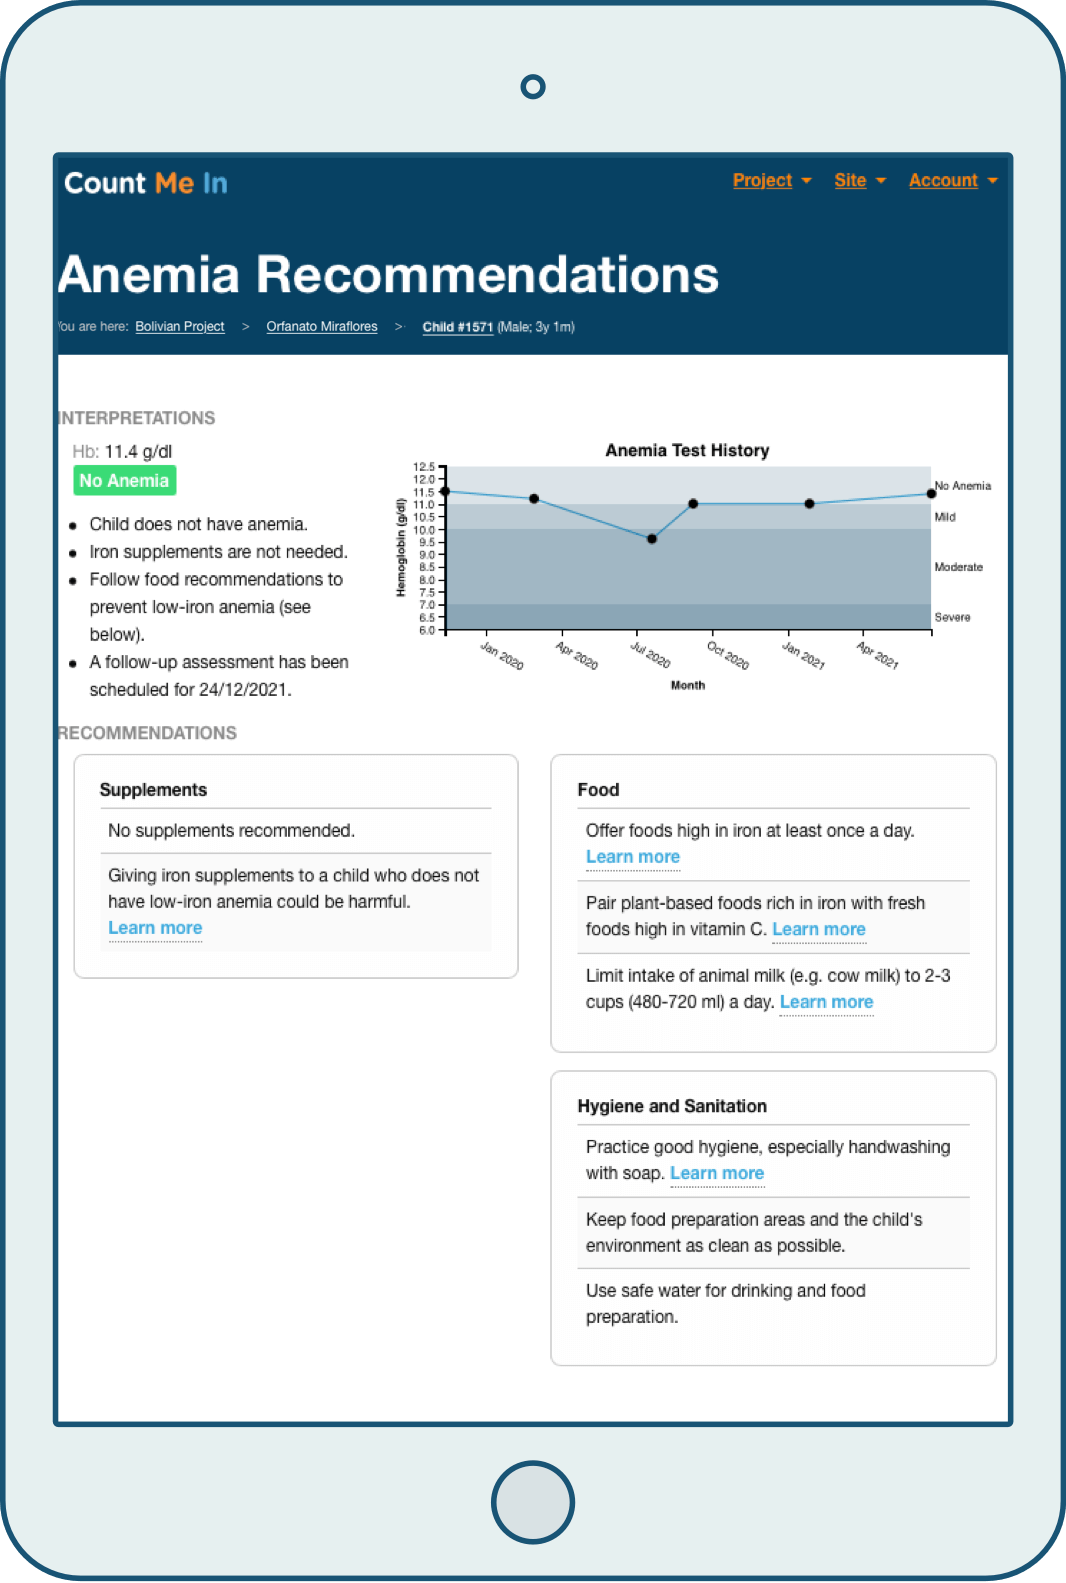 Icon of a tablet showing the Anemia Recommendations page of Count Me In